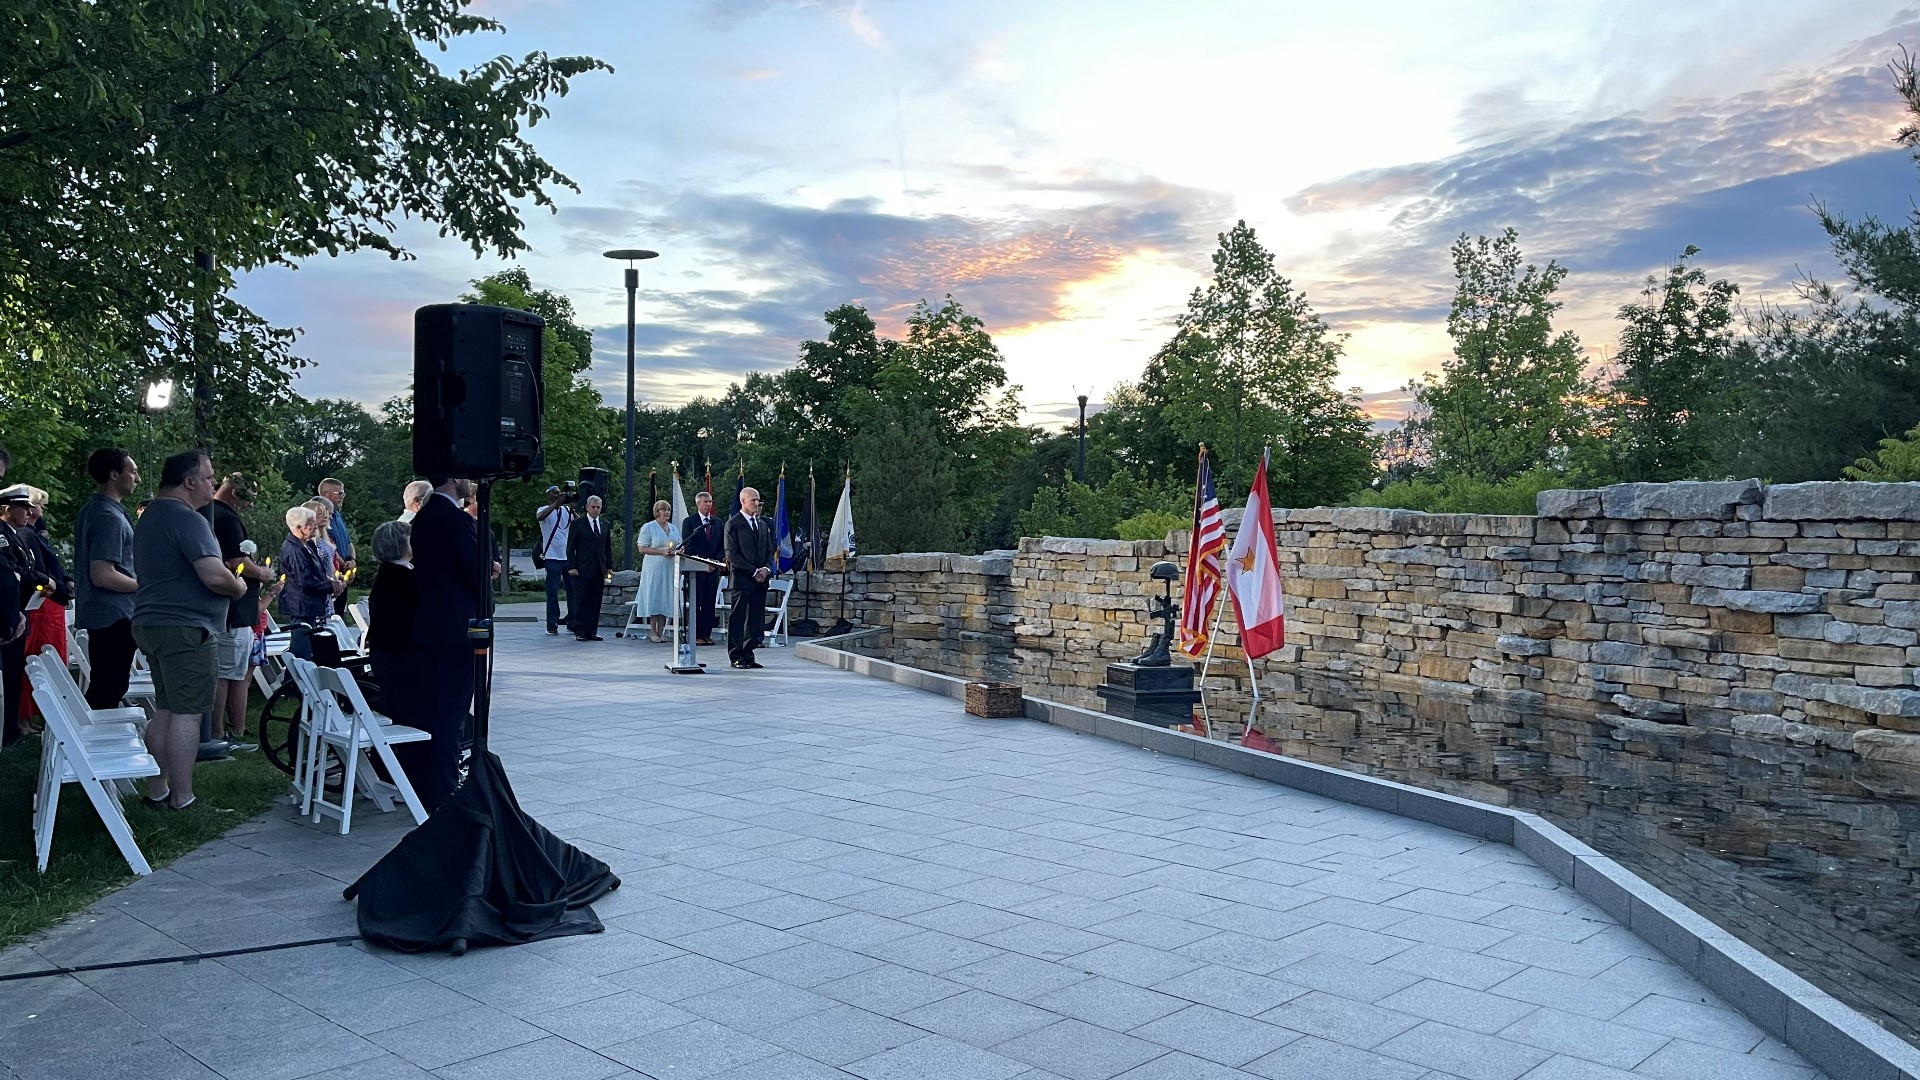 The National Veterans Memorial and Museum held a candlelight vigil Sunday night honoring Gold Star Families.